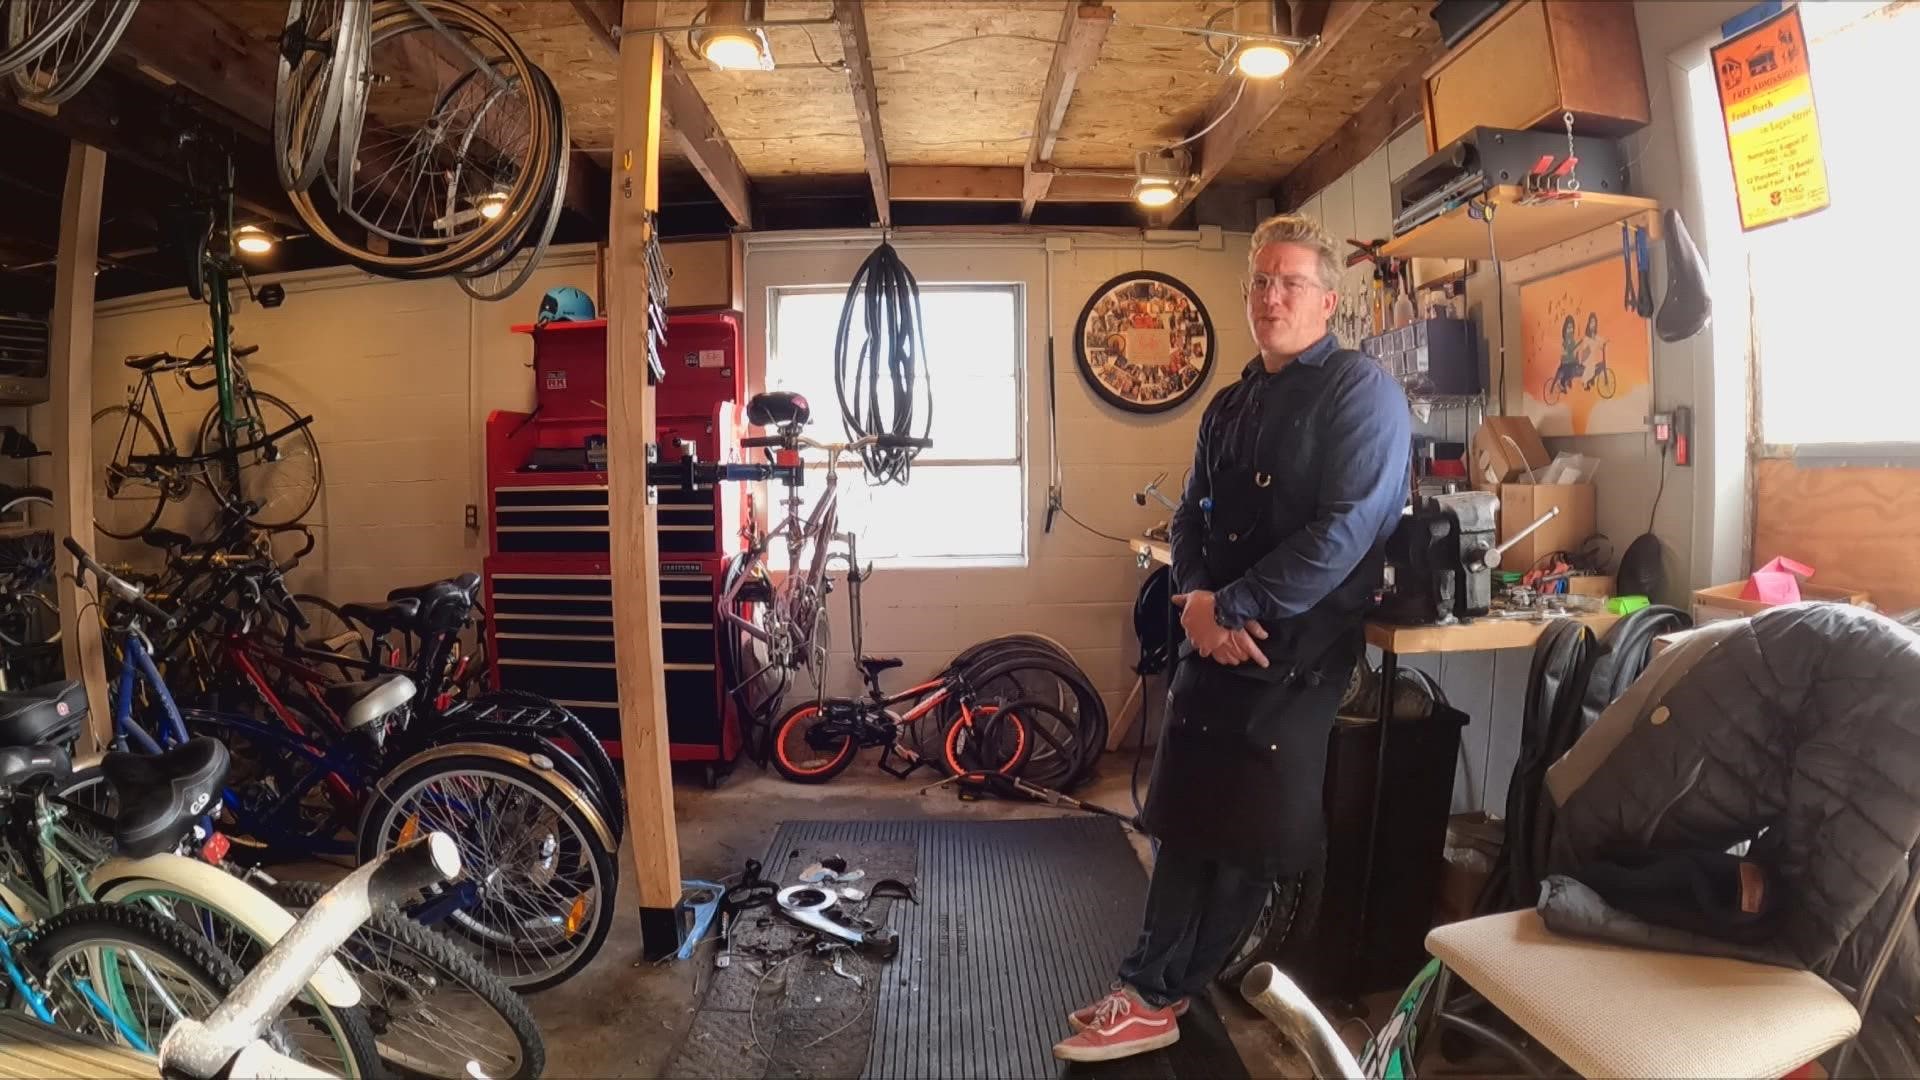 Joe Rudy decided to offer the refurbished bikes in his inventory free of charge to anybody for Christmas.